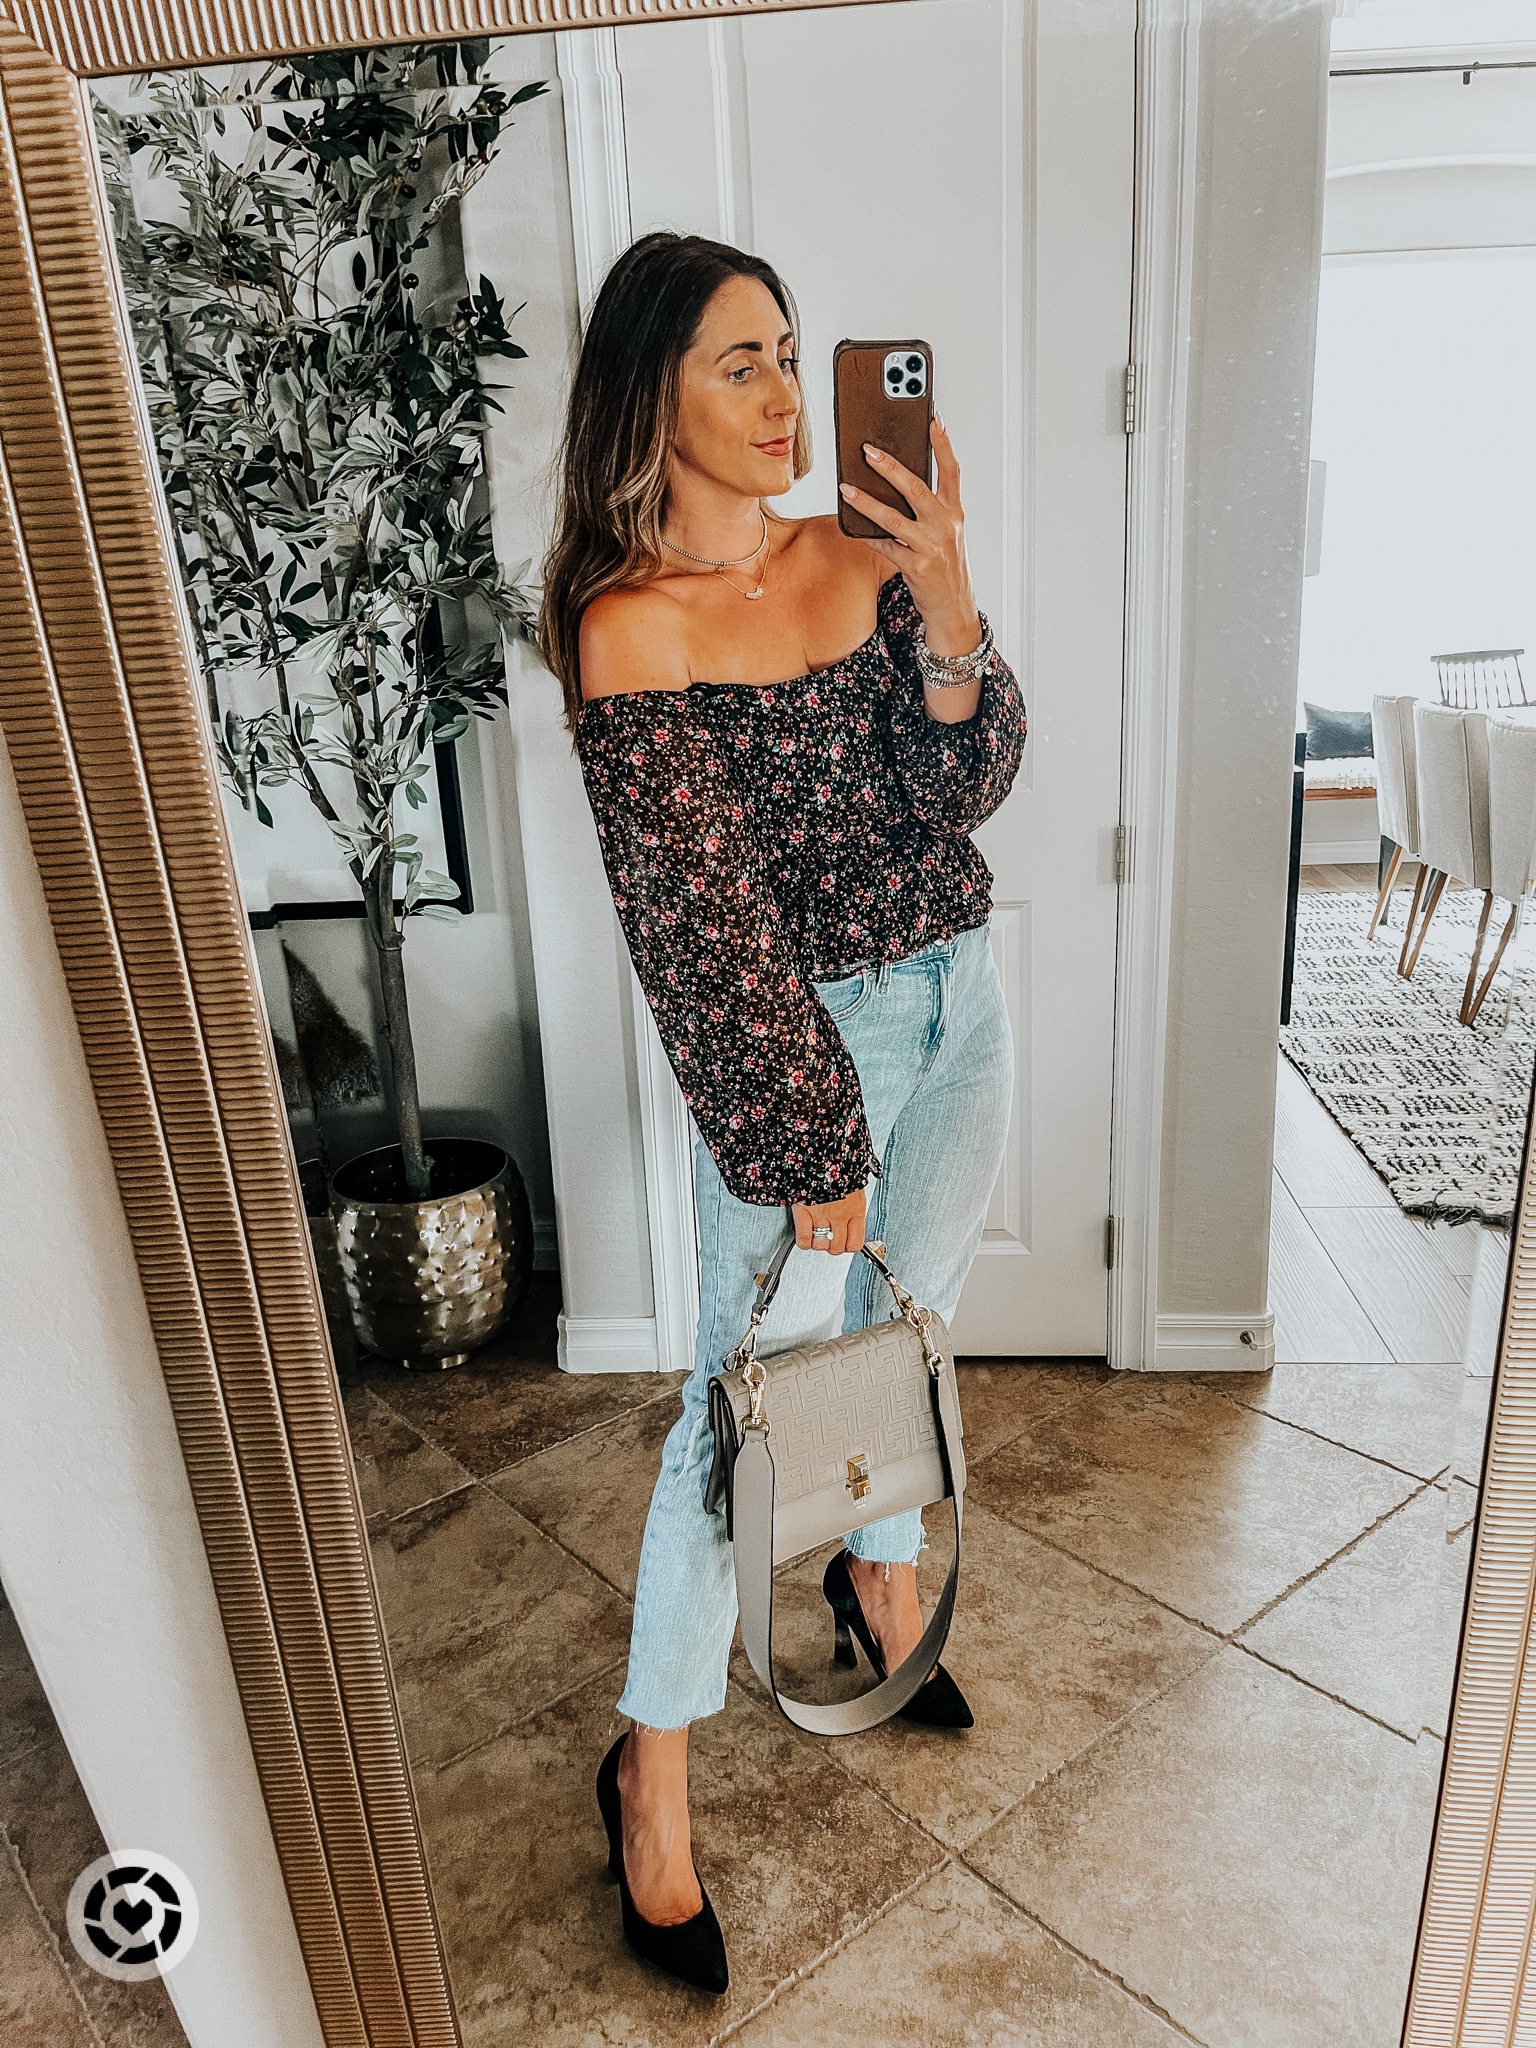 floral blouse with jeans and heels // nordstrom anniversary sale finds - date night outfit idea - This is our Bliss